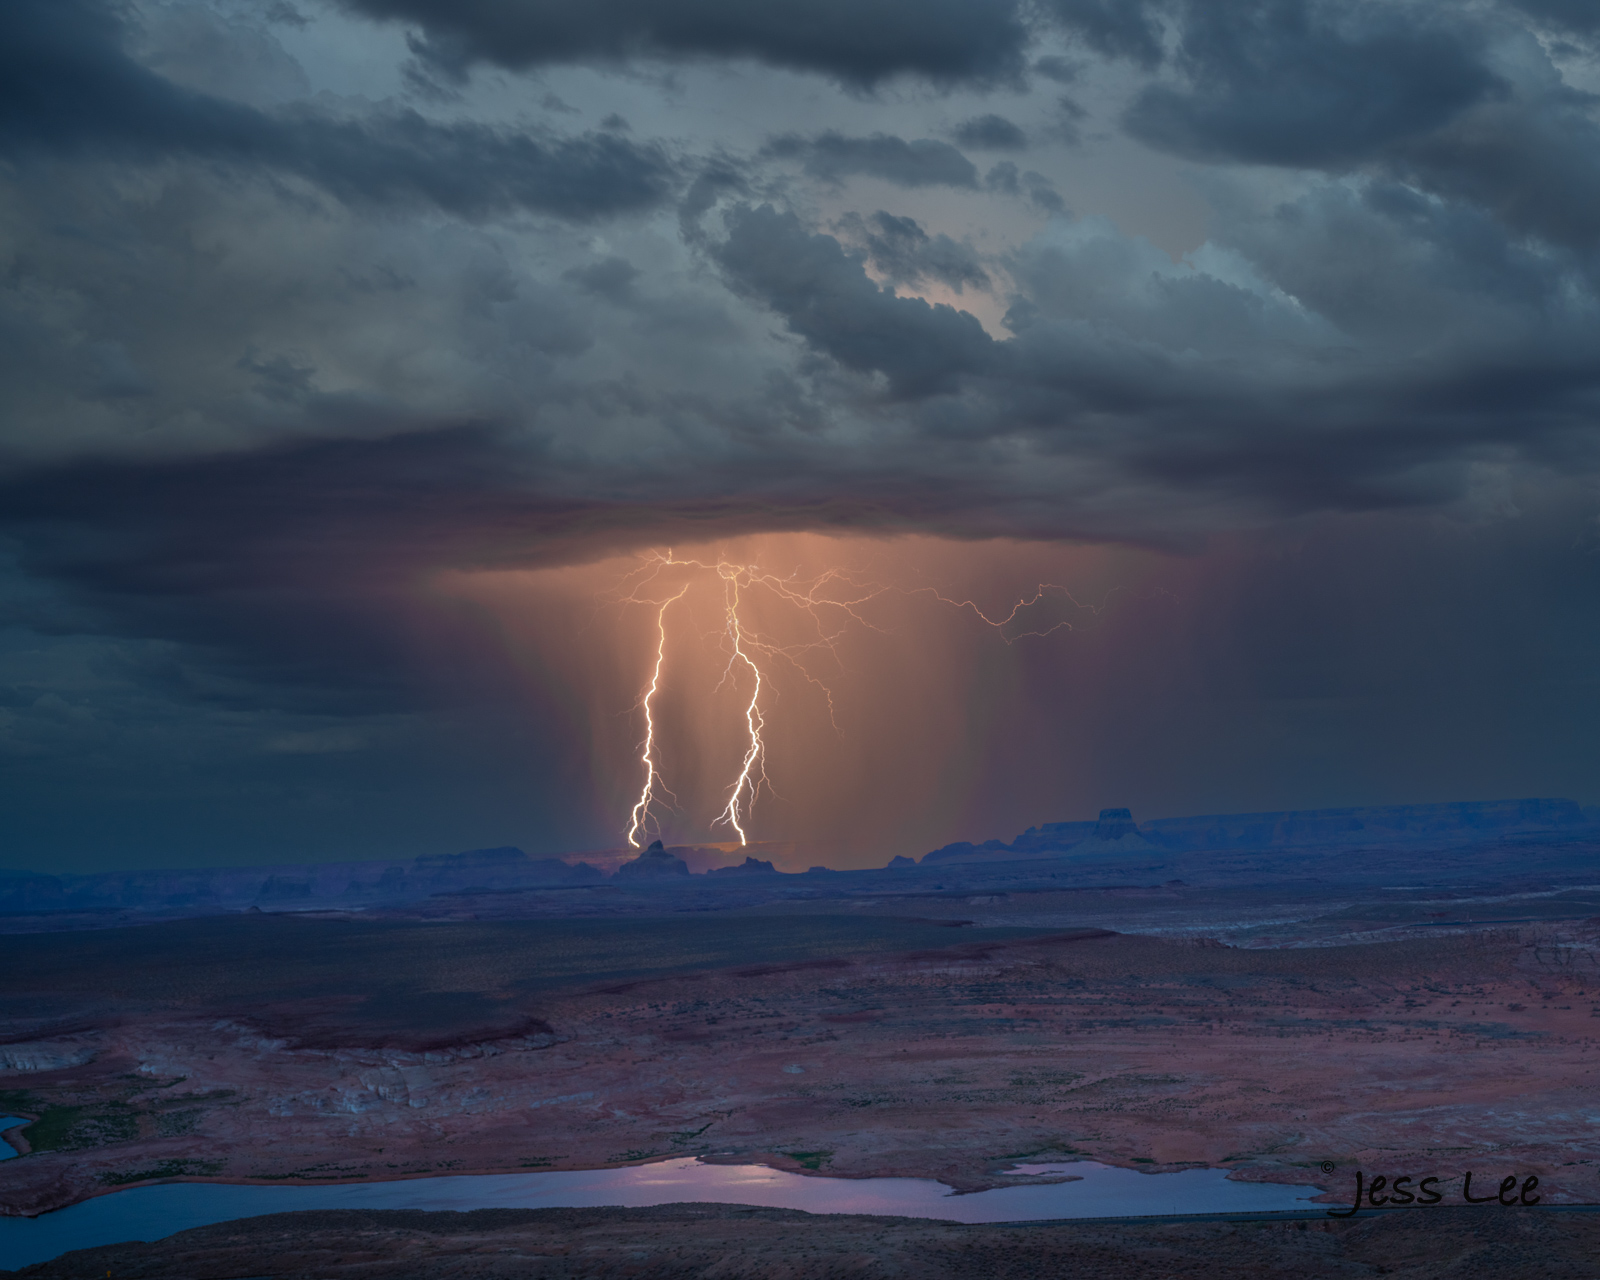 Twin lightning strikes on twin peaks beyond Lake Powell in the Navajo Reservation. This rare photograph was captured after many...